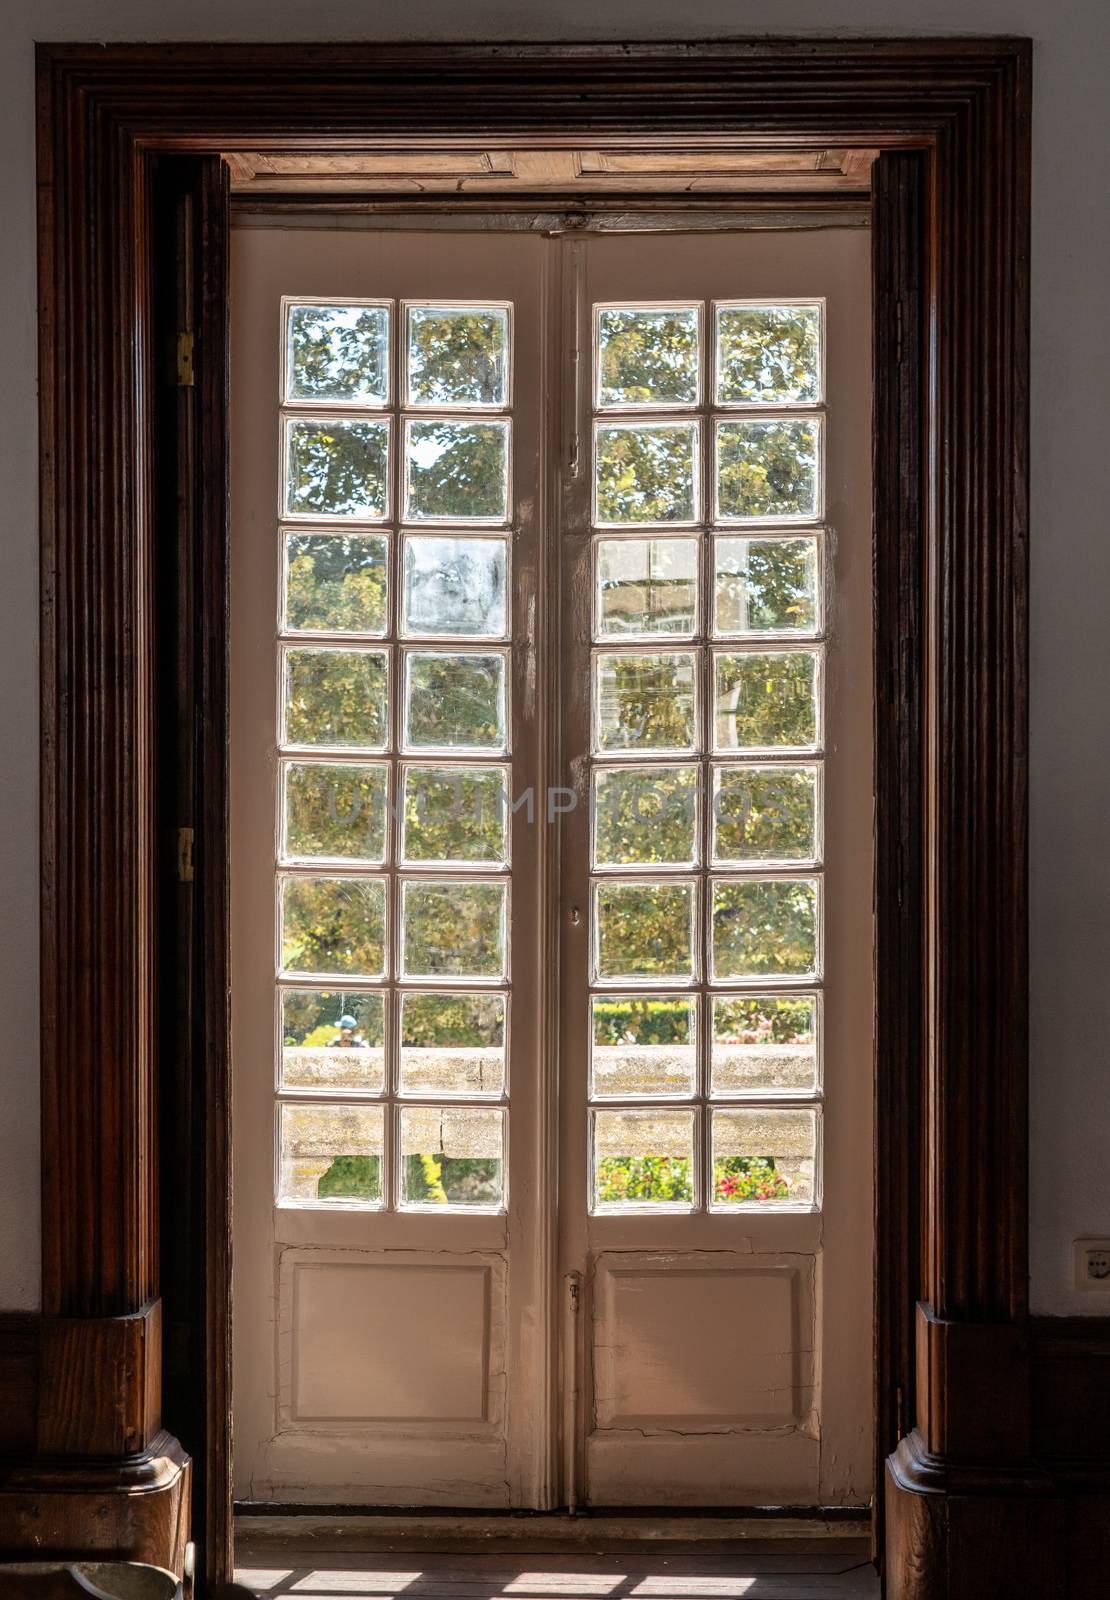 Old wooden glazed doors leading to ornate garden in old mansion by steheap